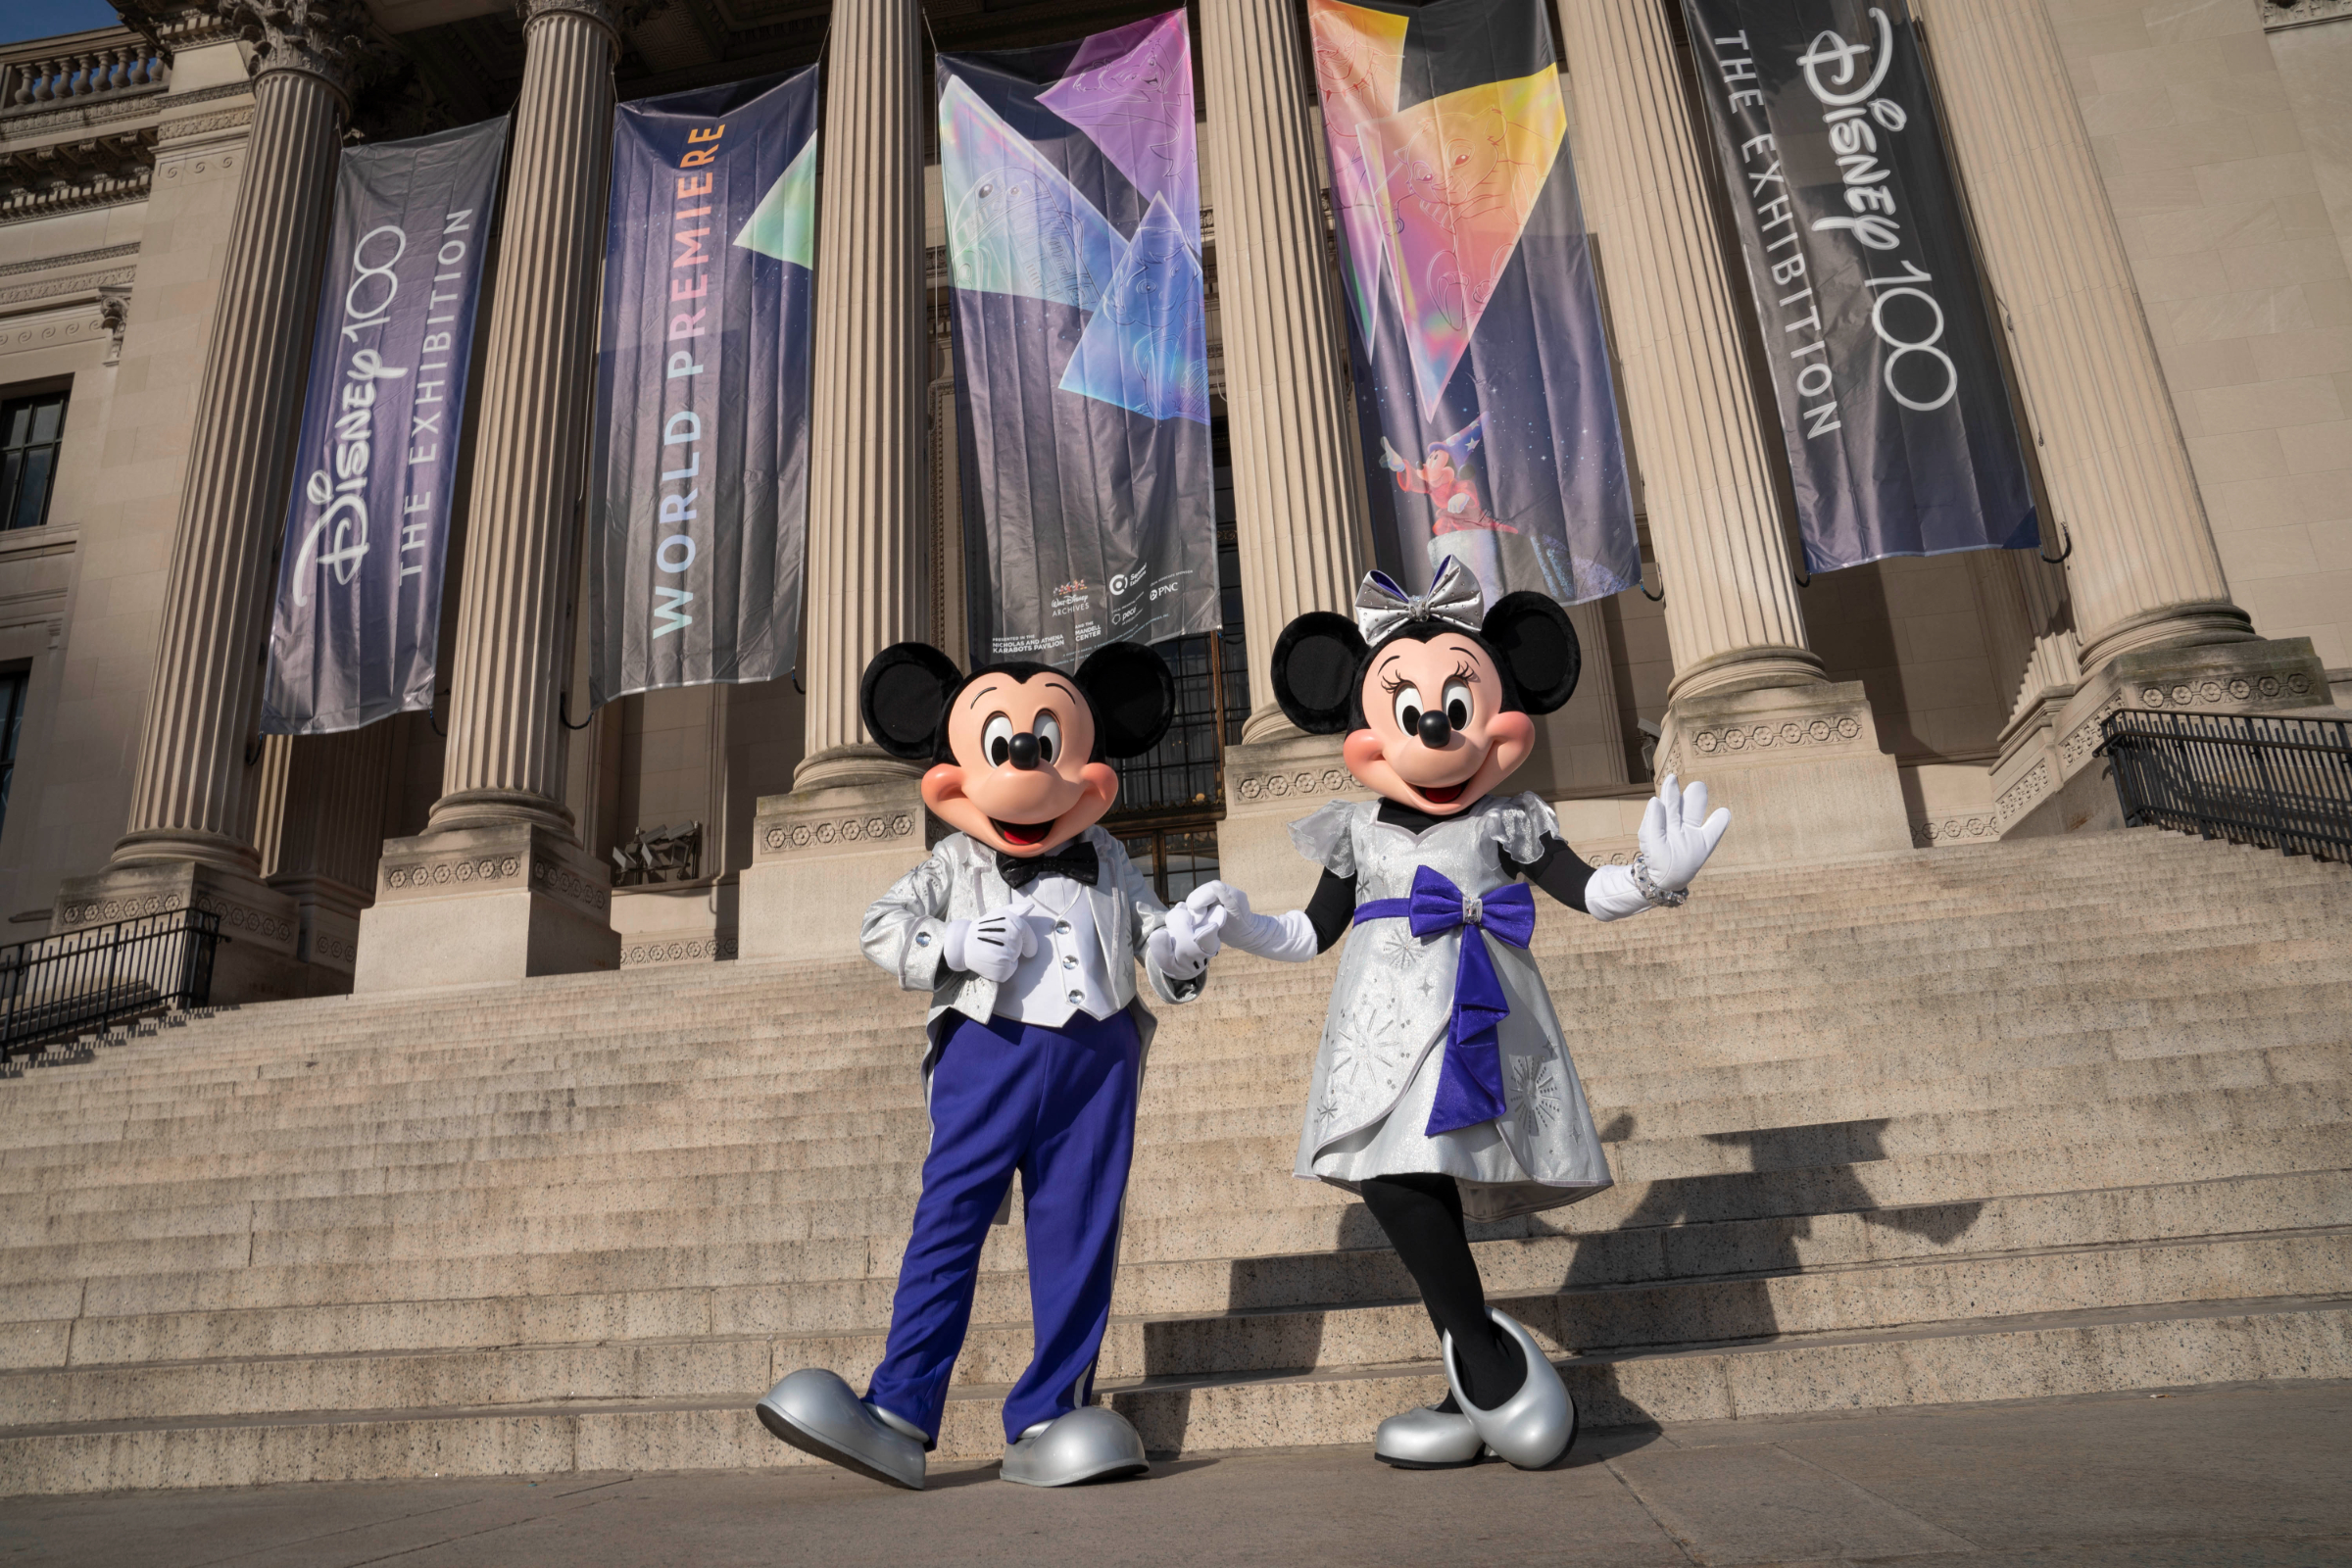 Mickey and Minnie outside The Franklin Institute in Philadelphia for the opening of Disney 100 The Exhibition